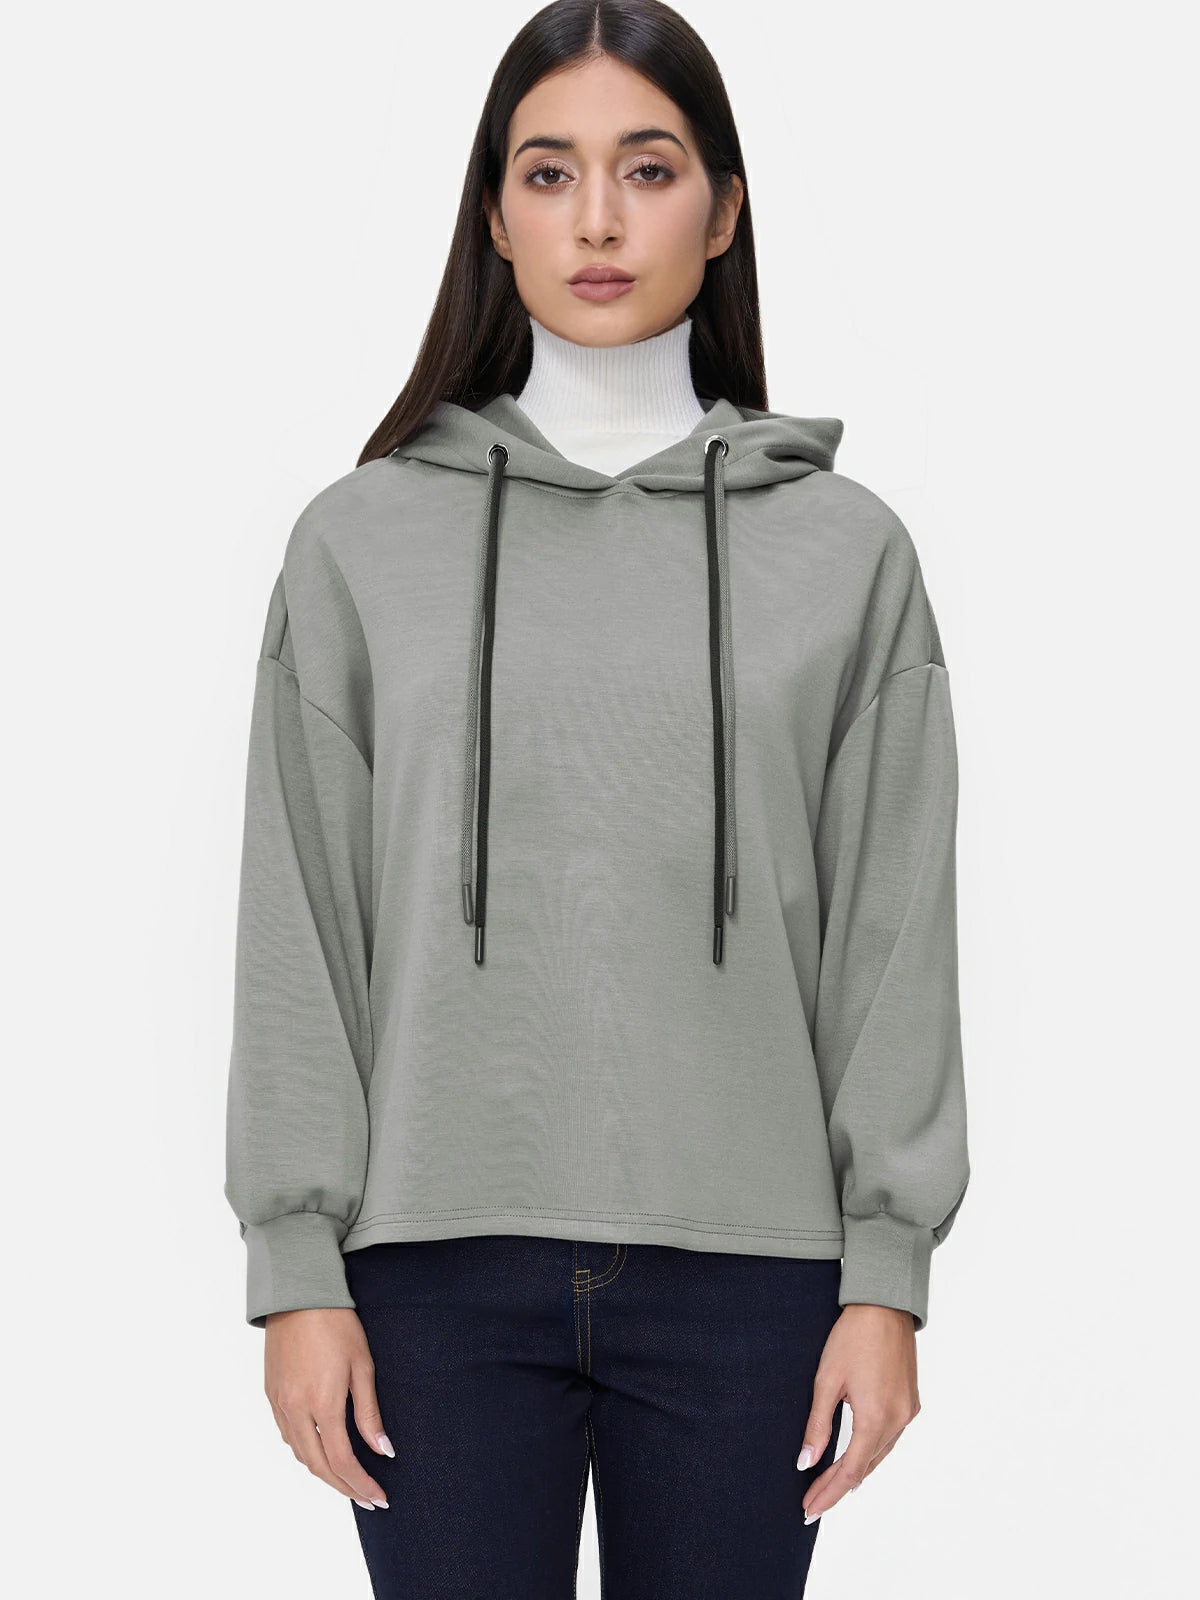 Relaxed Sophistication: Grey  Hoodie for Casual-Chic Outfits